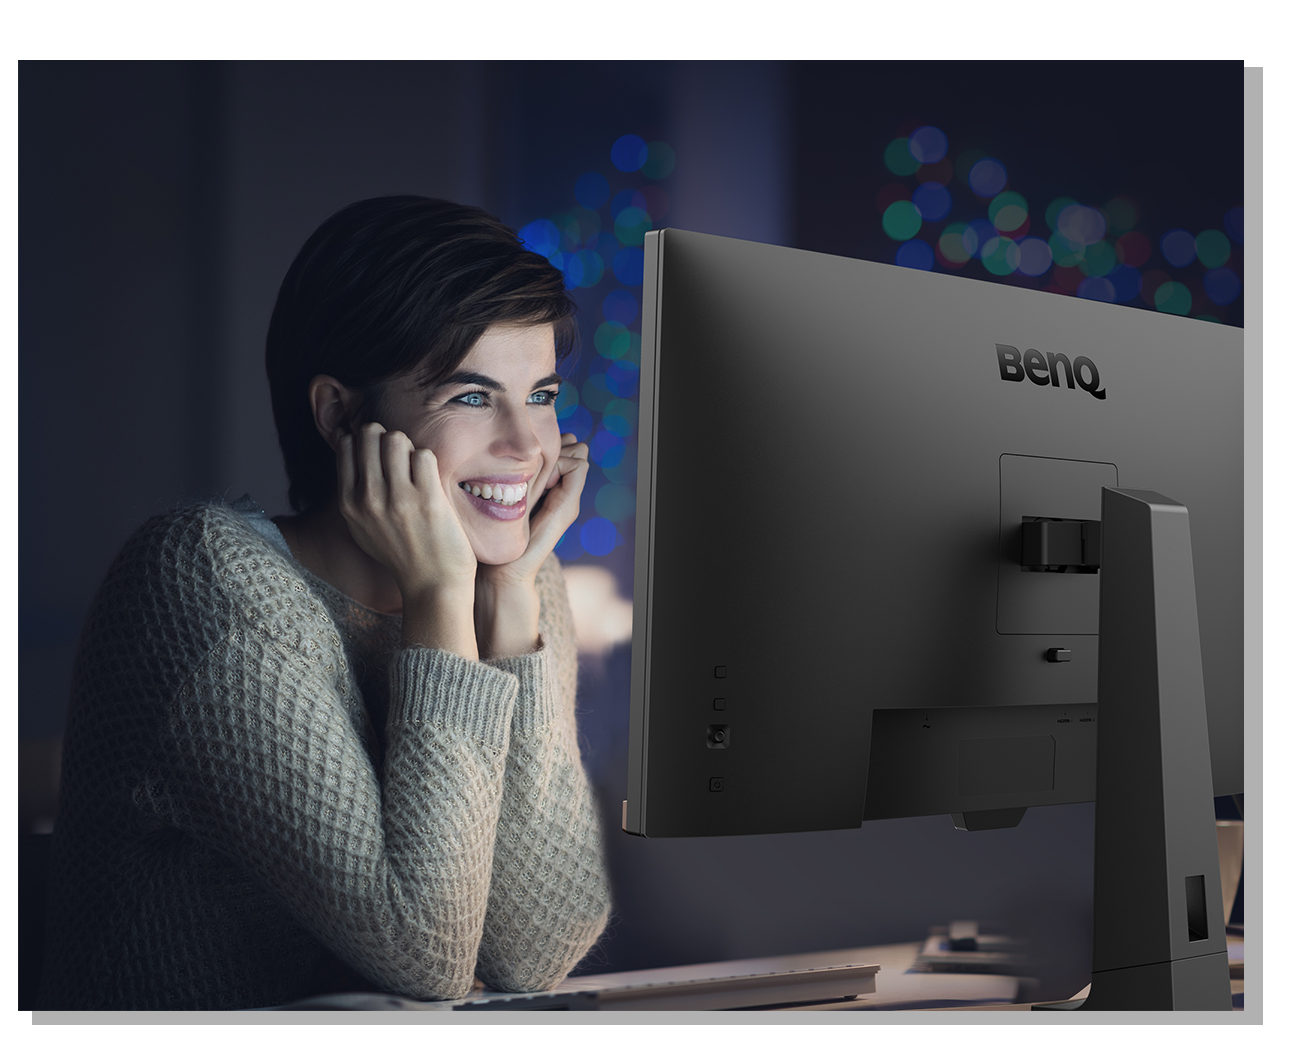 benq entertainment monitors let you immerse in the midnight movie at home